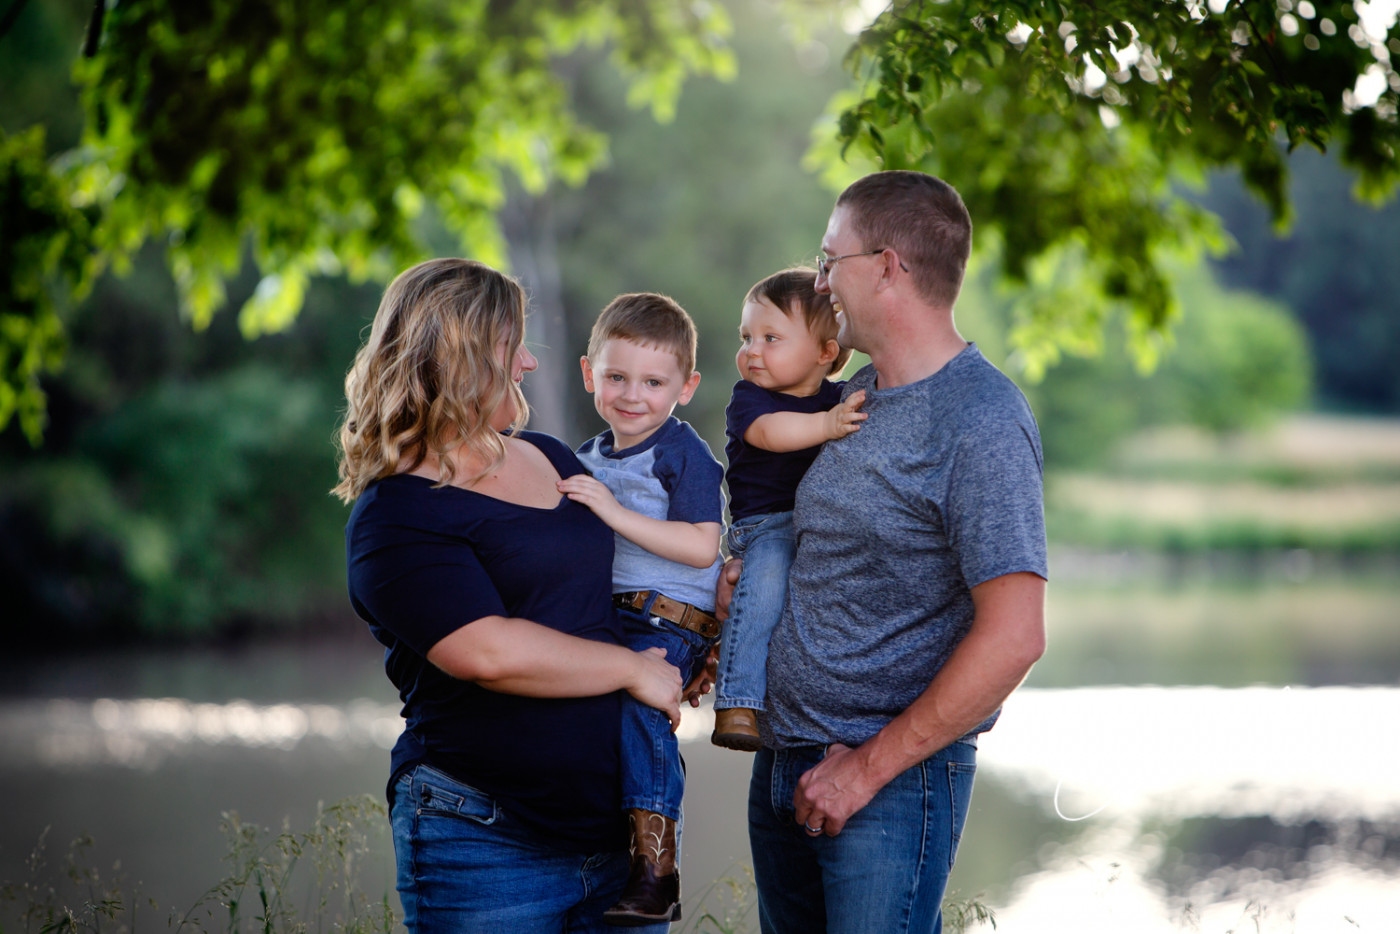 The Neubauer Family  |  An Outdoor Family Session 